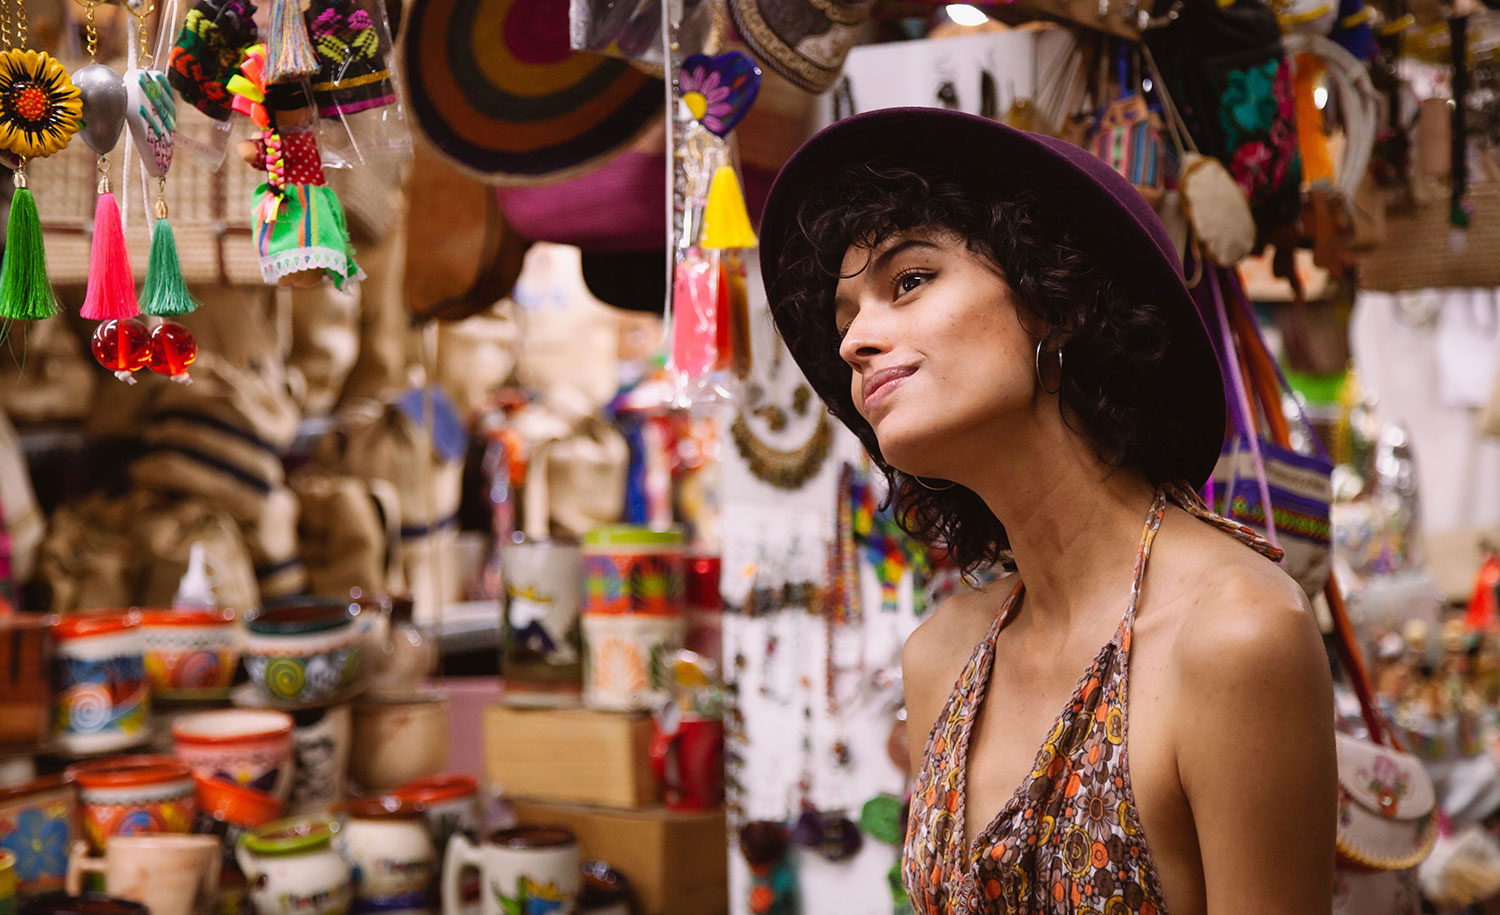 A highly sensitive woman shops at a flea market in Mexico